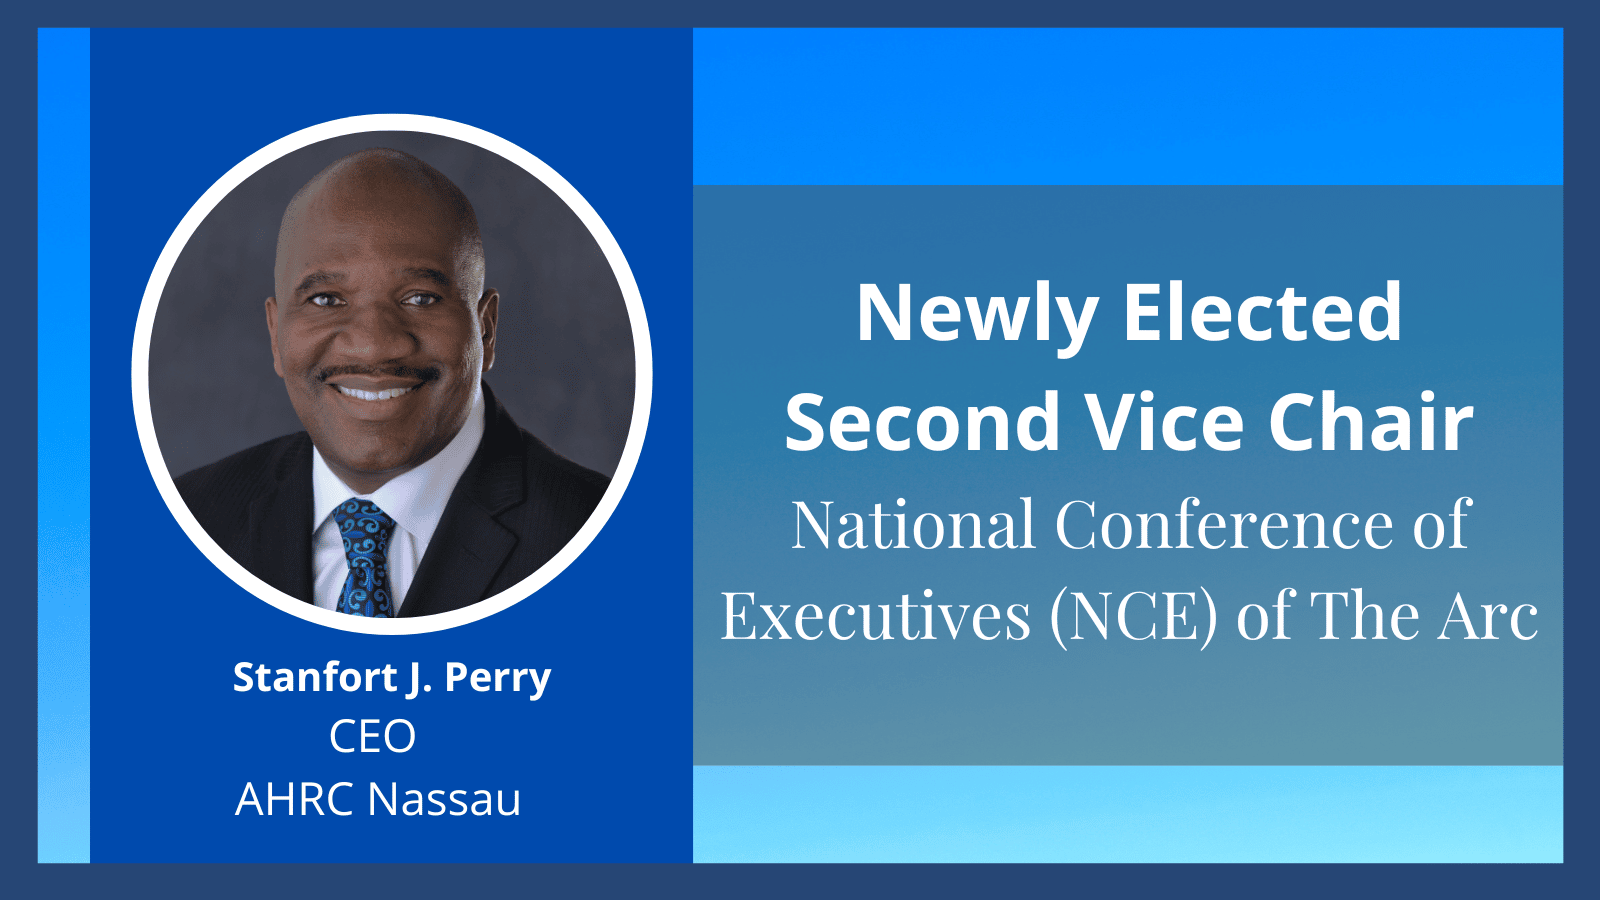 Stanfort J. Perry, CEO, AHRC Nassau, Newly Elected Second Vice Chair, National Conference of Executives, (NCE) of The Arc